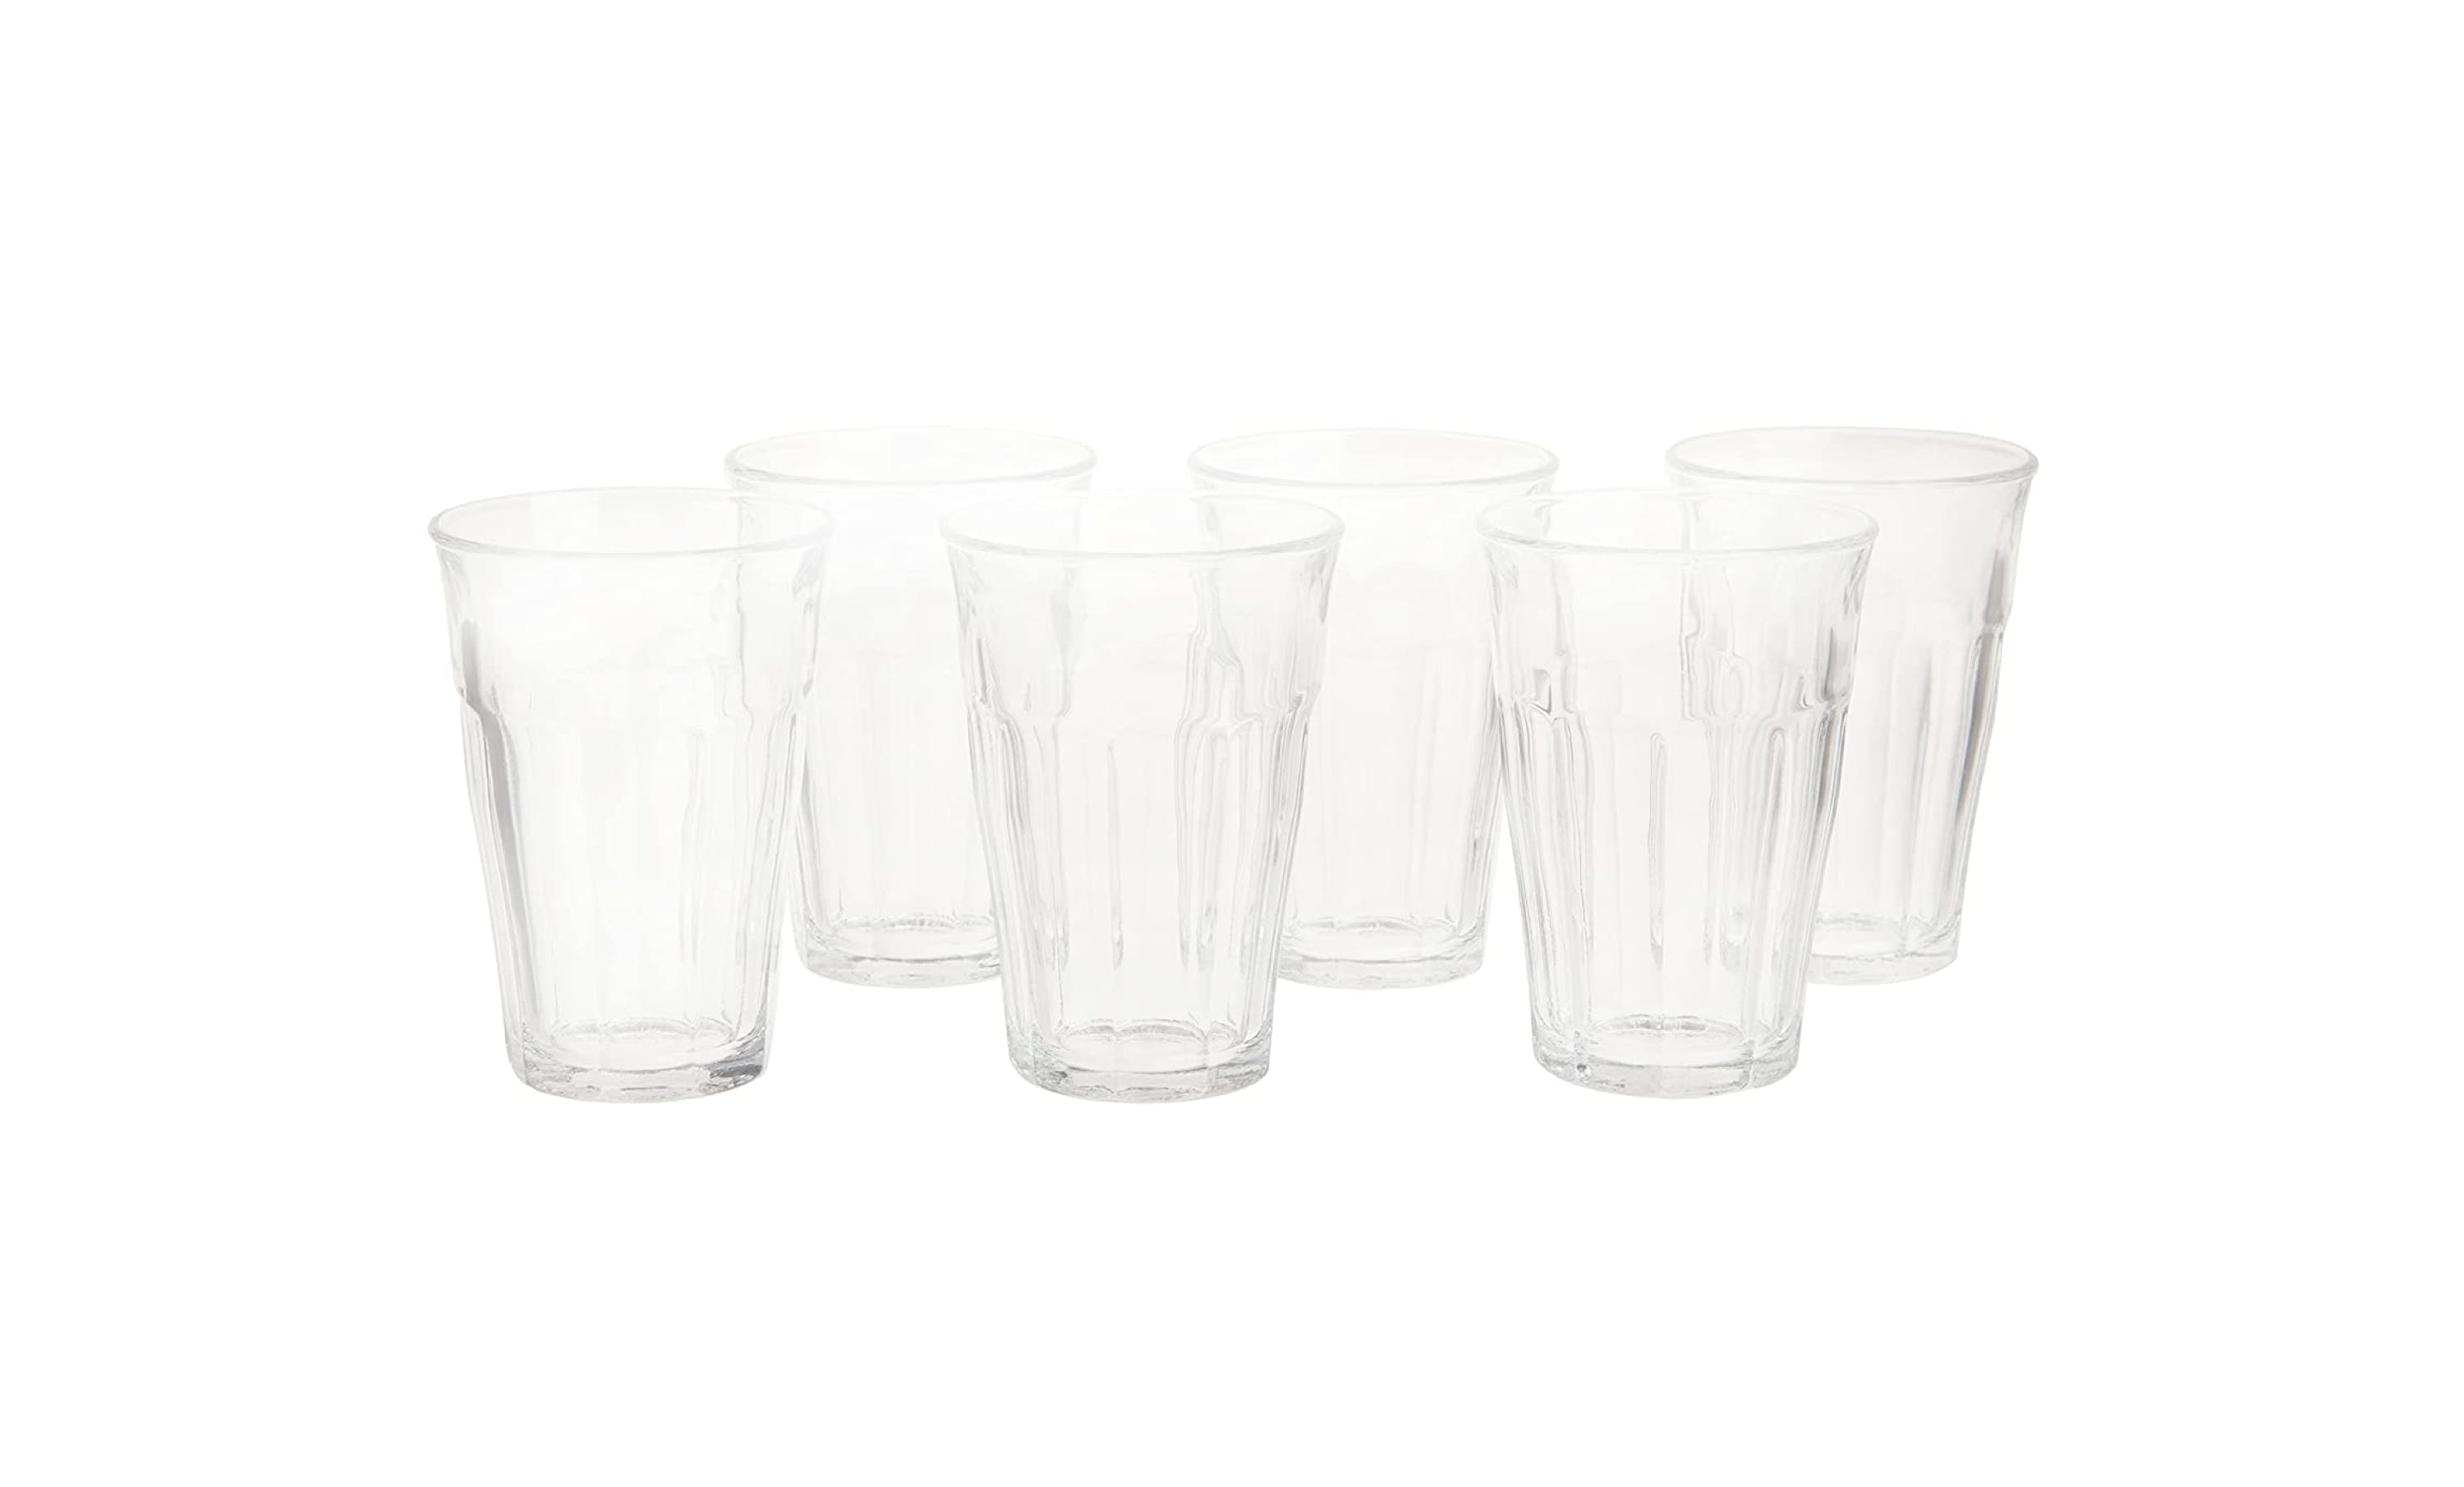 http://res.cloudinary.com/the-infatuation/image/upload/v1656122682/cms/features/the-best-drinking-glasses-to-buy-online/Duralex_Picardie.jpg